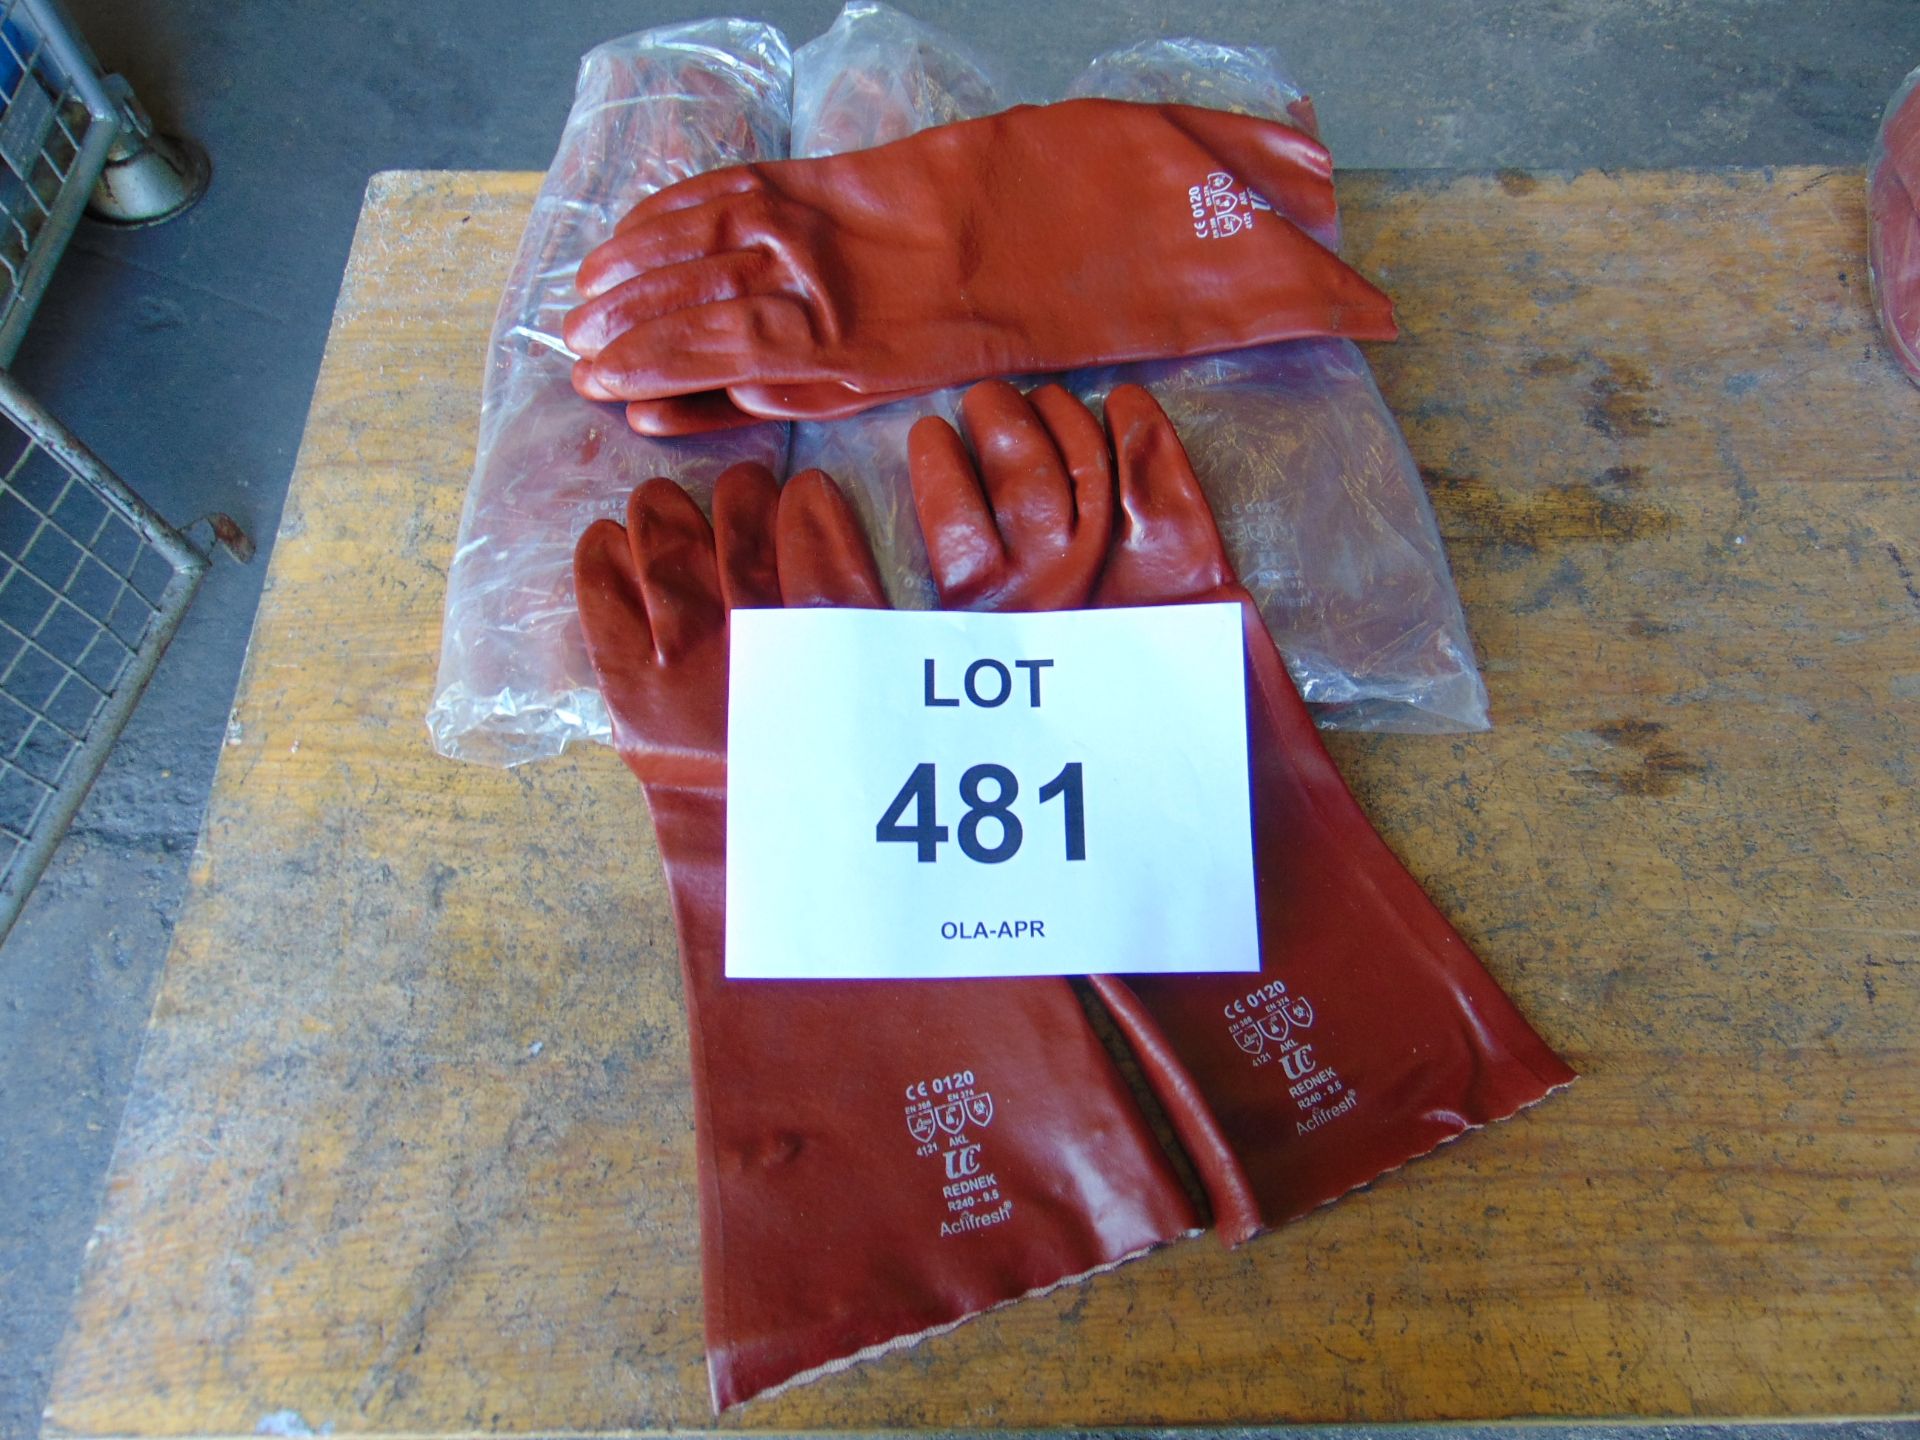 8 x New / Unissued Pairs of Rubberised Gloves